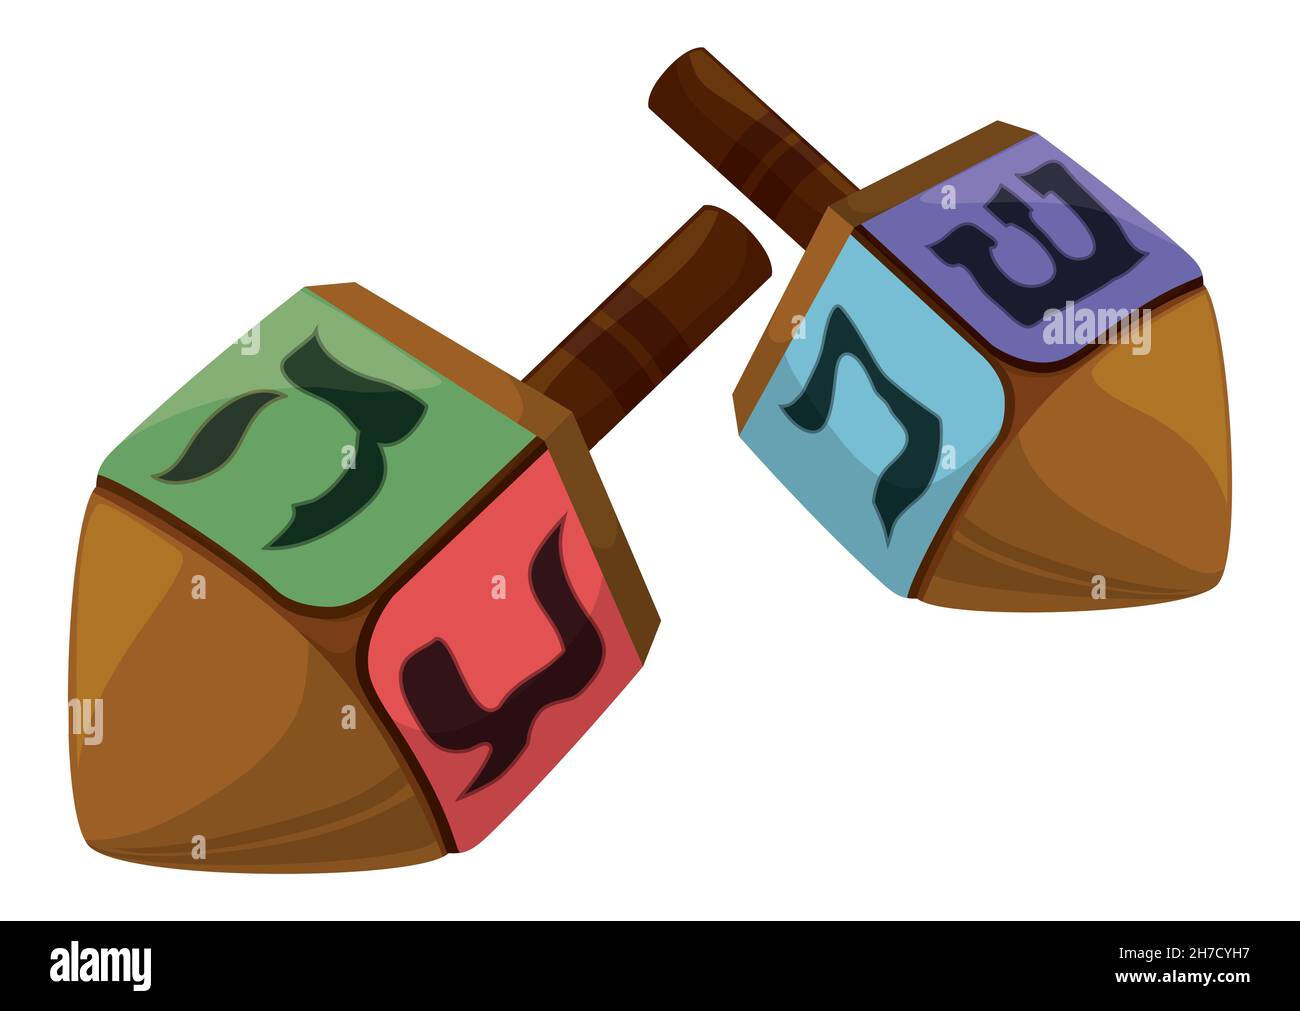 Two dreidels -a four-sided spinning top- with traditional Hebrew letters to have fun with children and friends during Hanukkah. Stock Vector